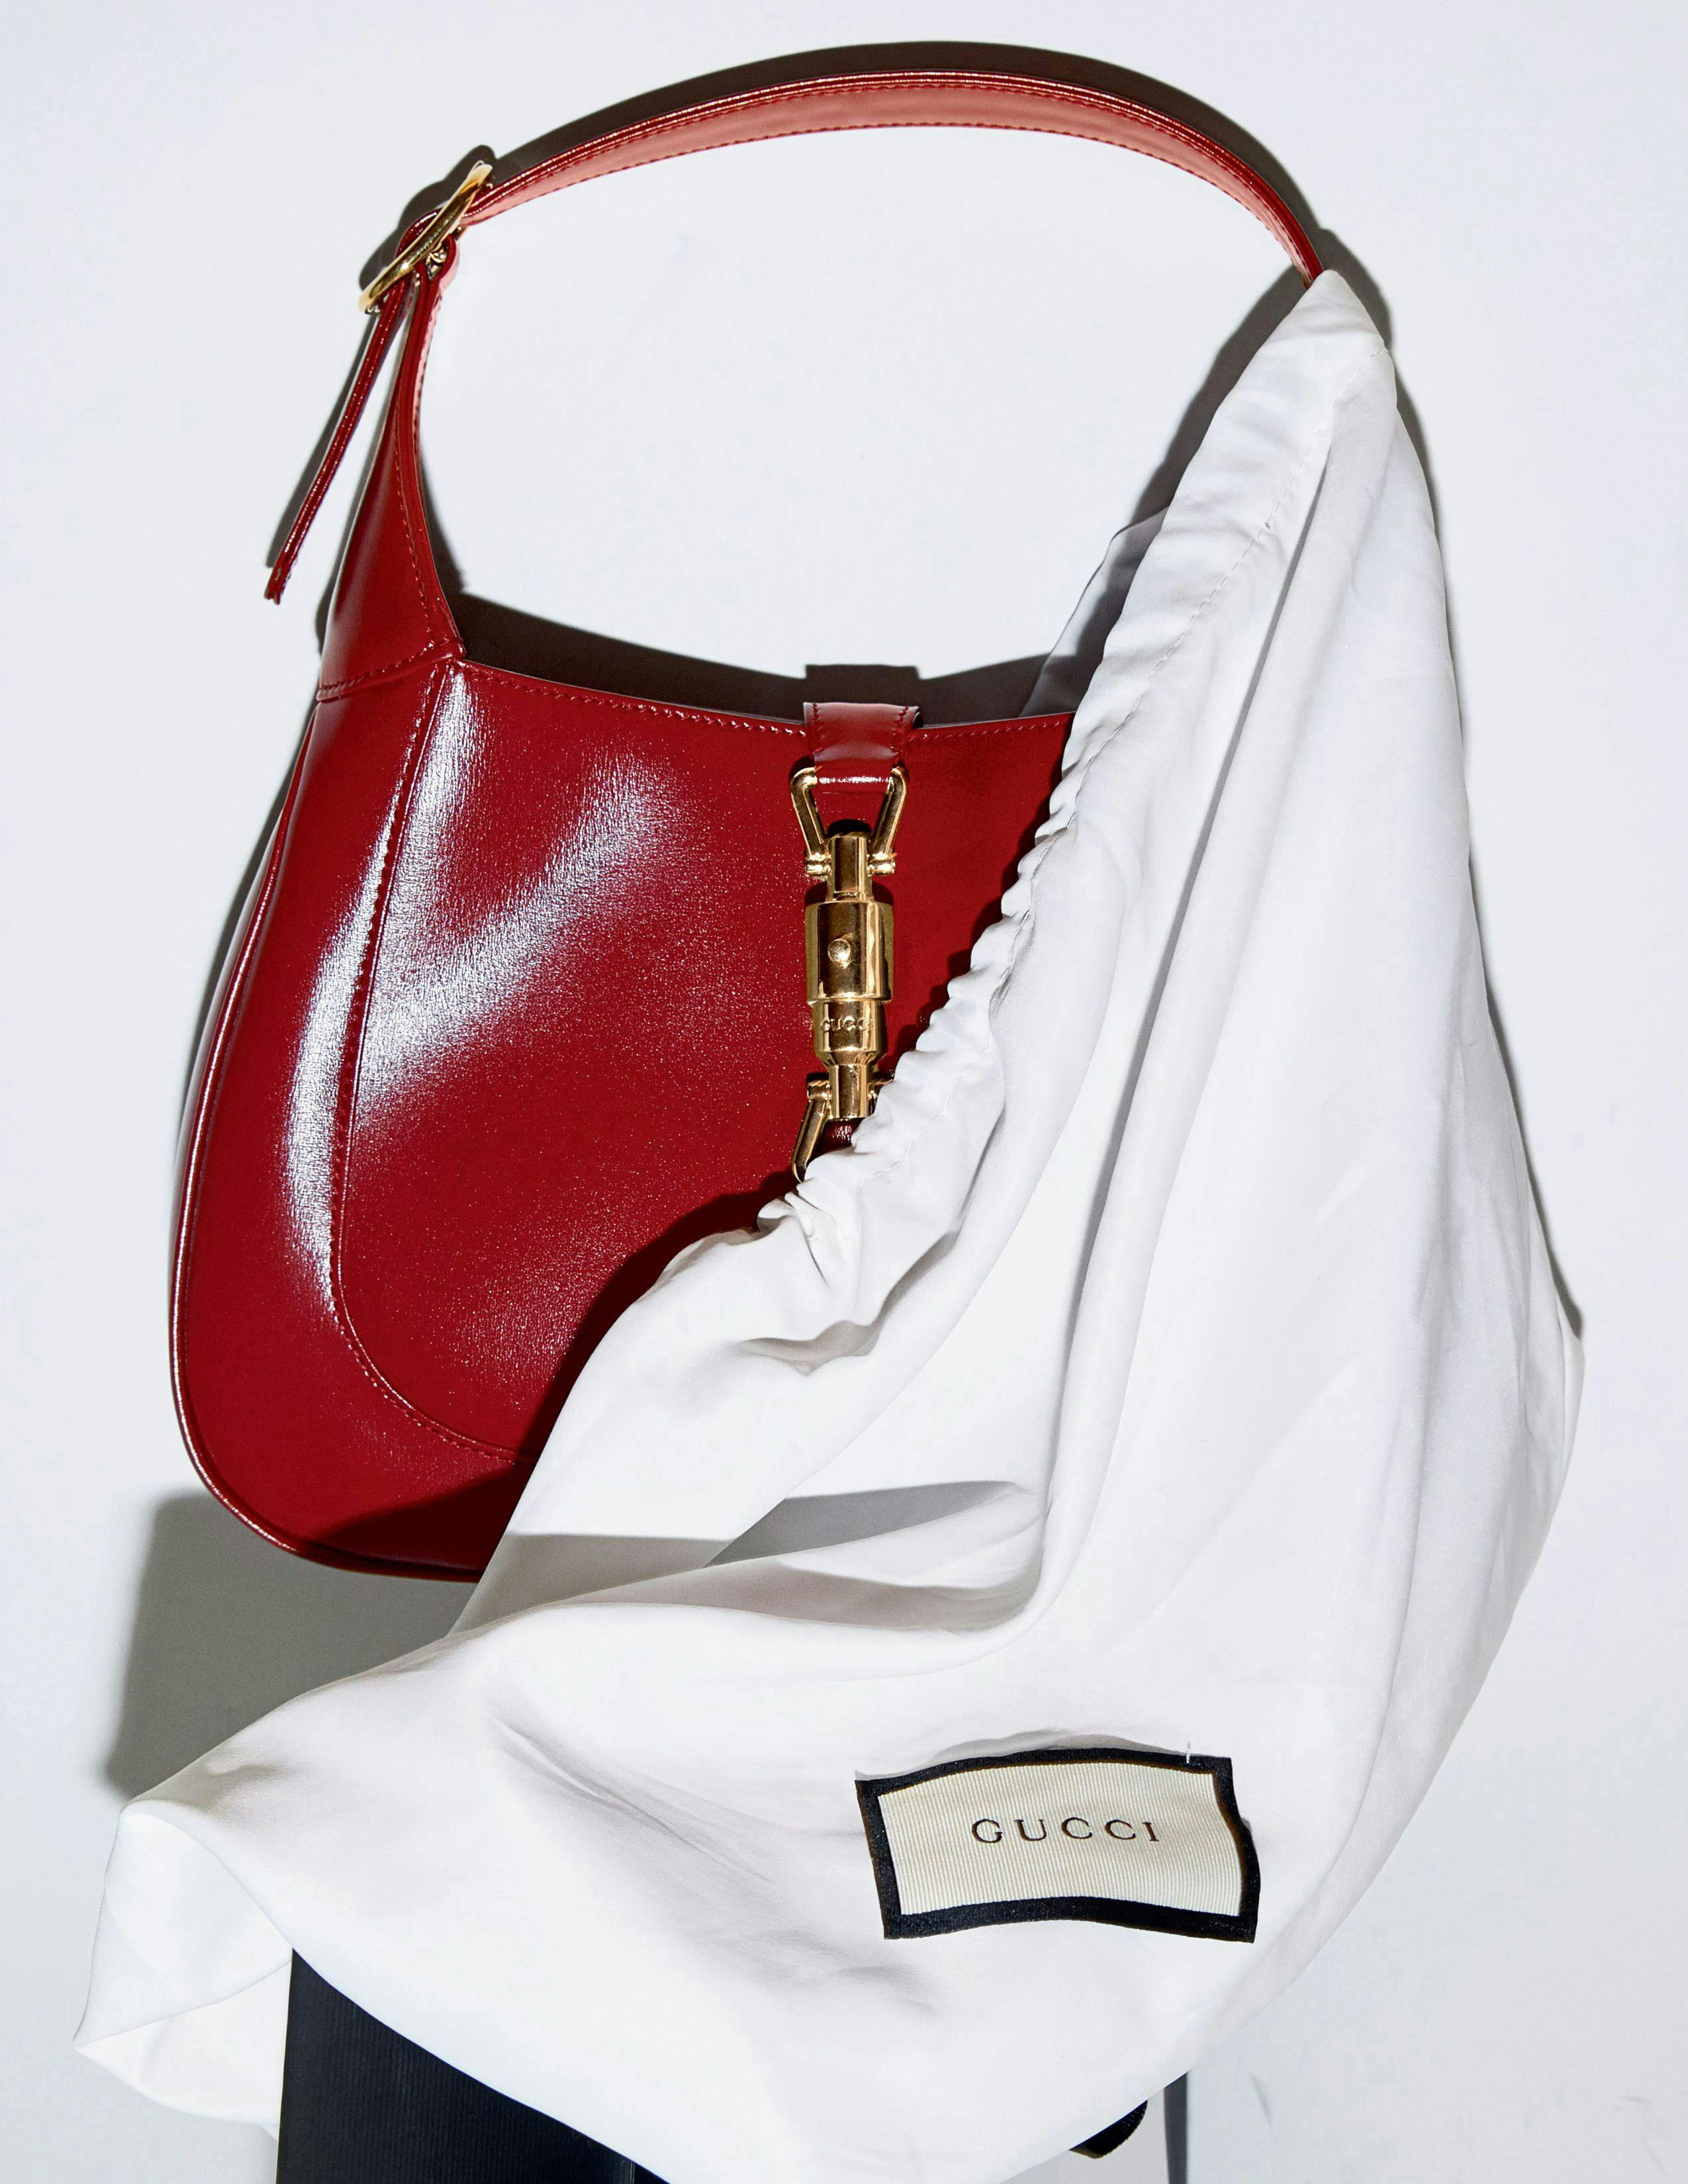 Women Today Want Handbags with a High Future Resale Value – Gucci ...